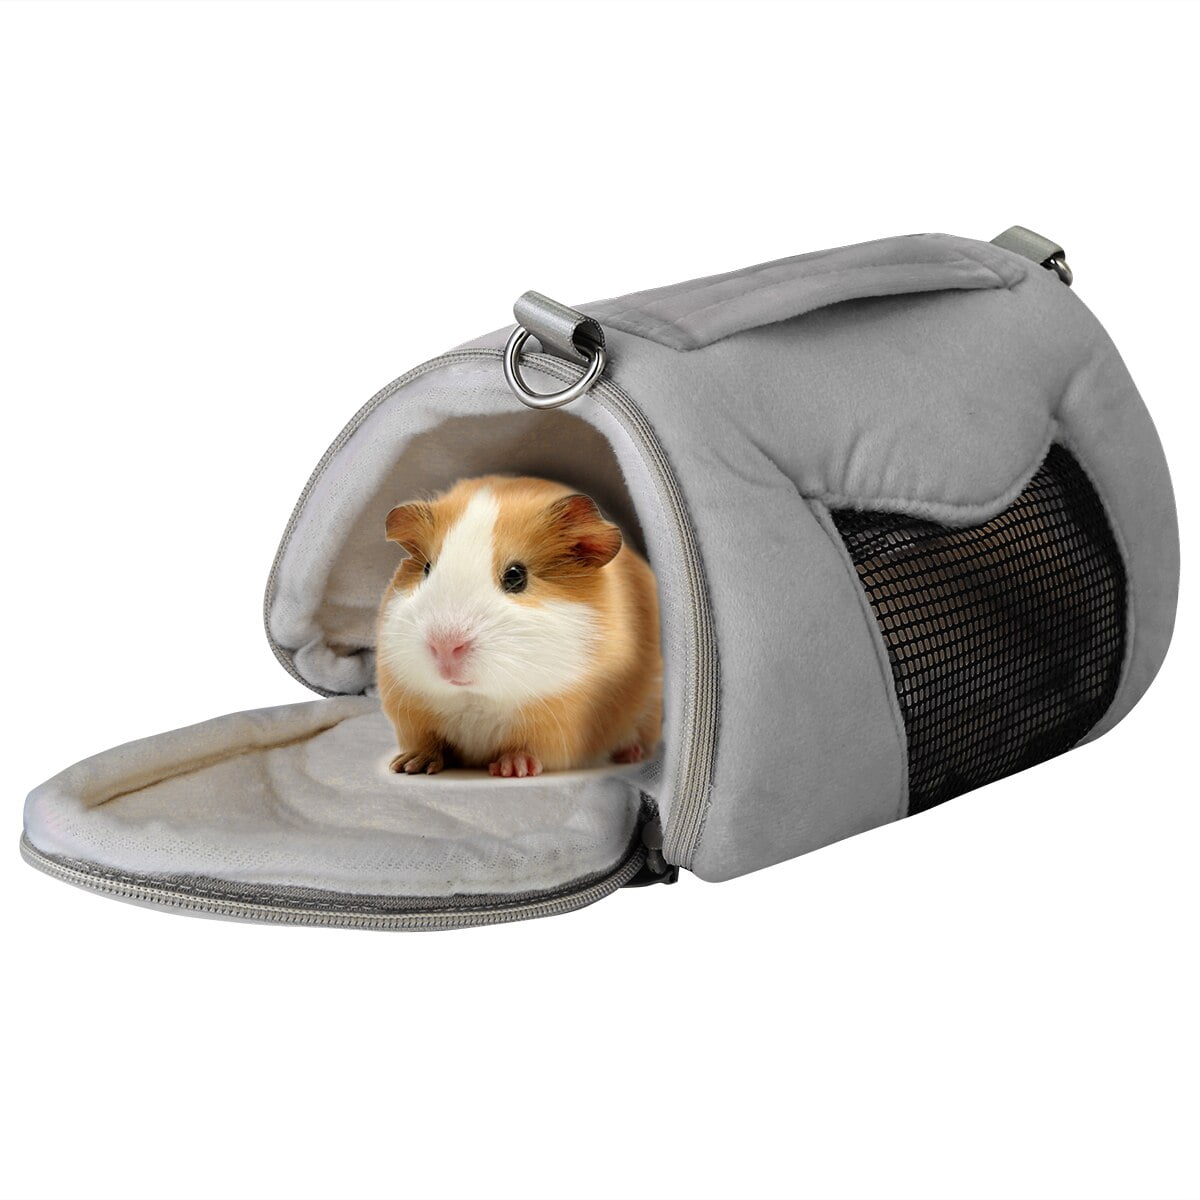 Portable Small Pet Hamster Carrying Bag Winter Warm Squirrel Guinea Pig Hedgehog Carrier Cage Outdoor Carrying Backpack Holder